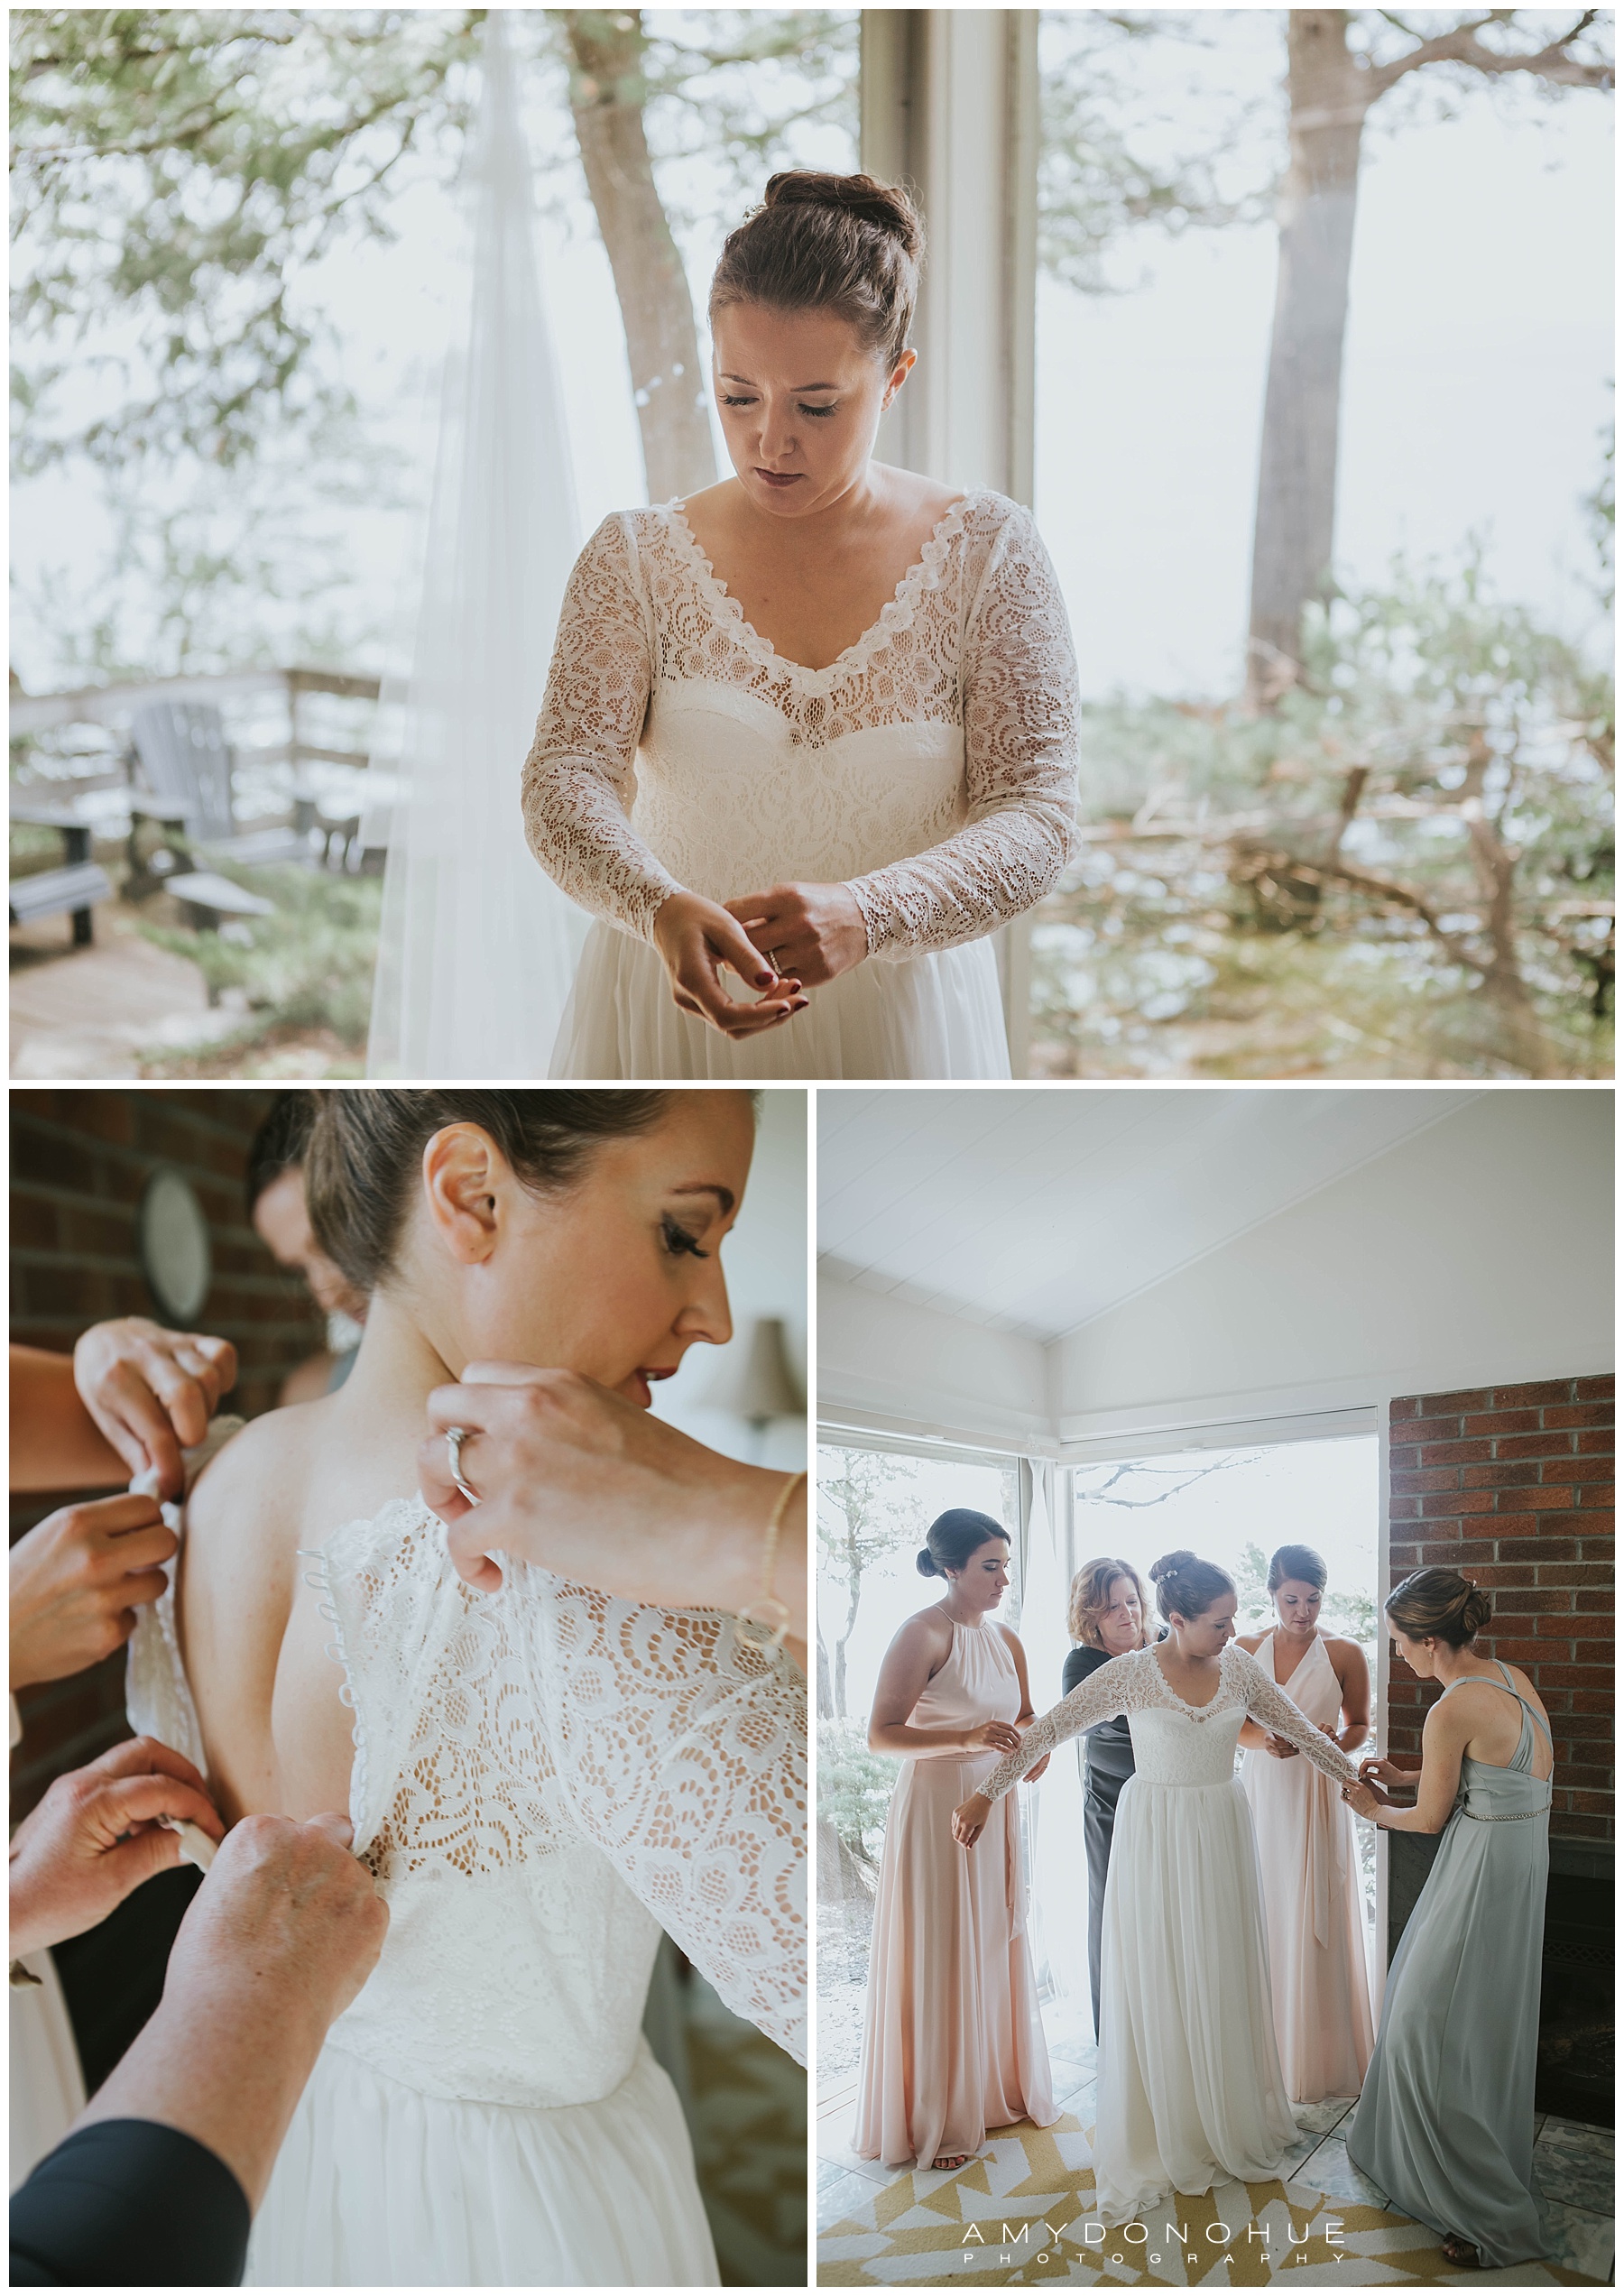 Wedding Gown by Milamira Bridal | Photography by Amy Donohue Photography